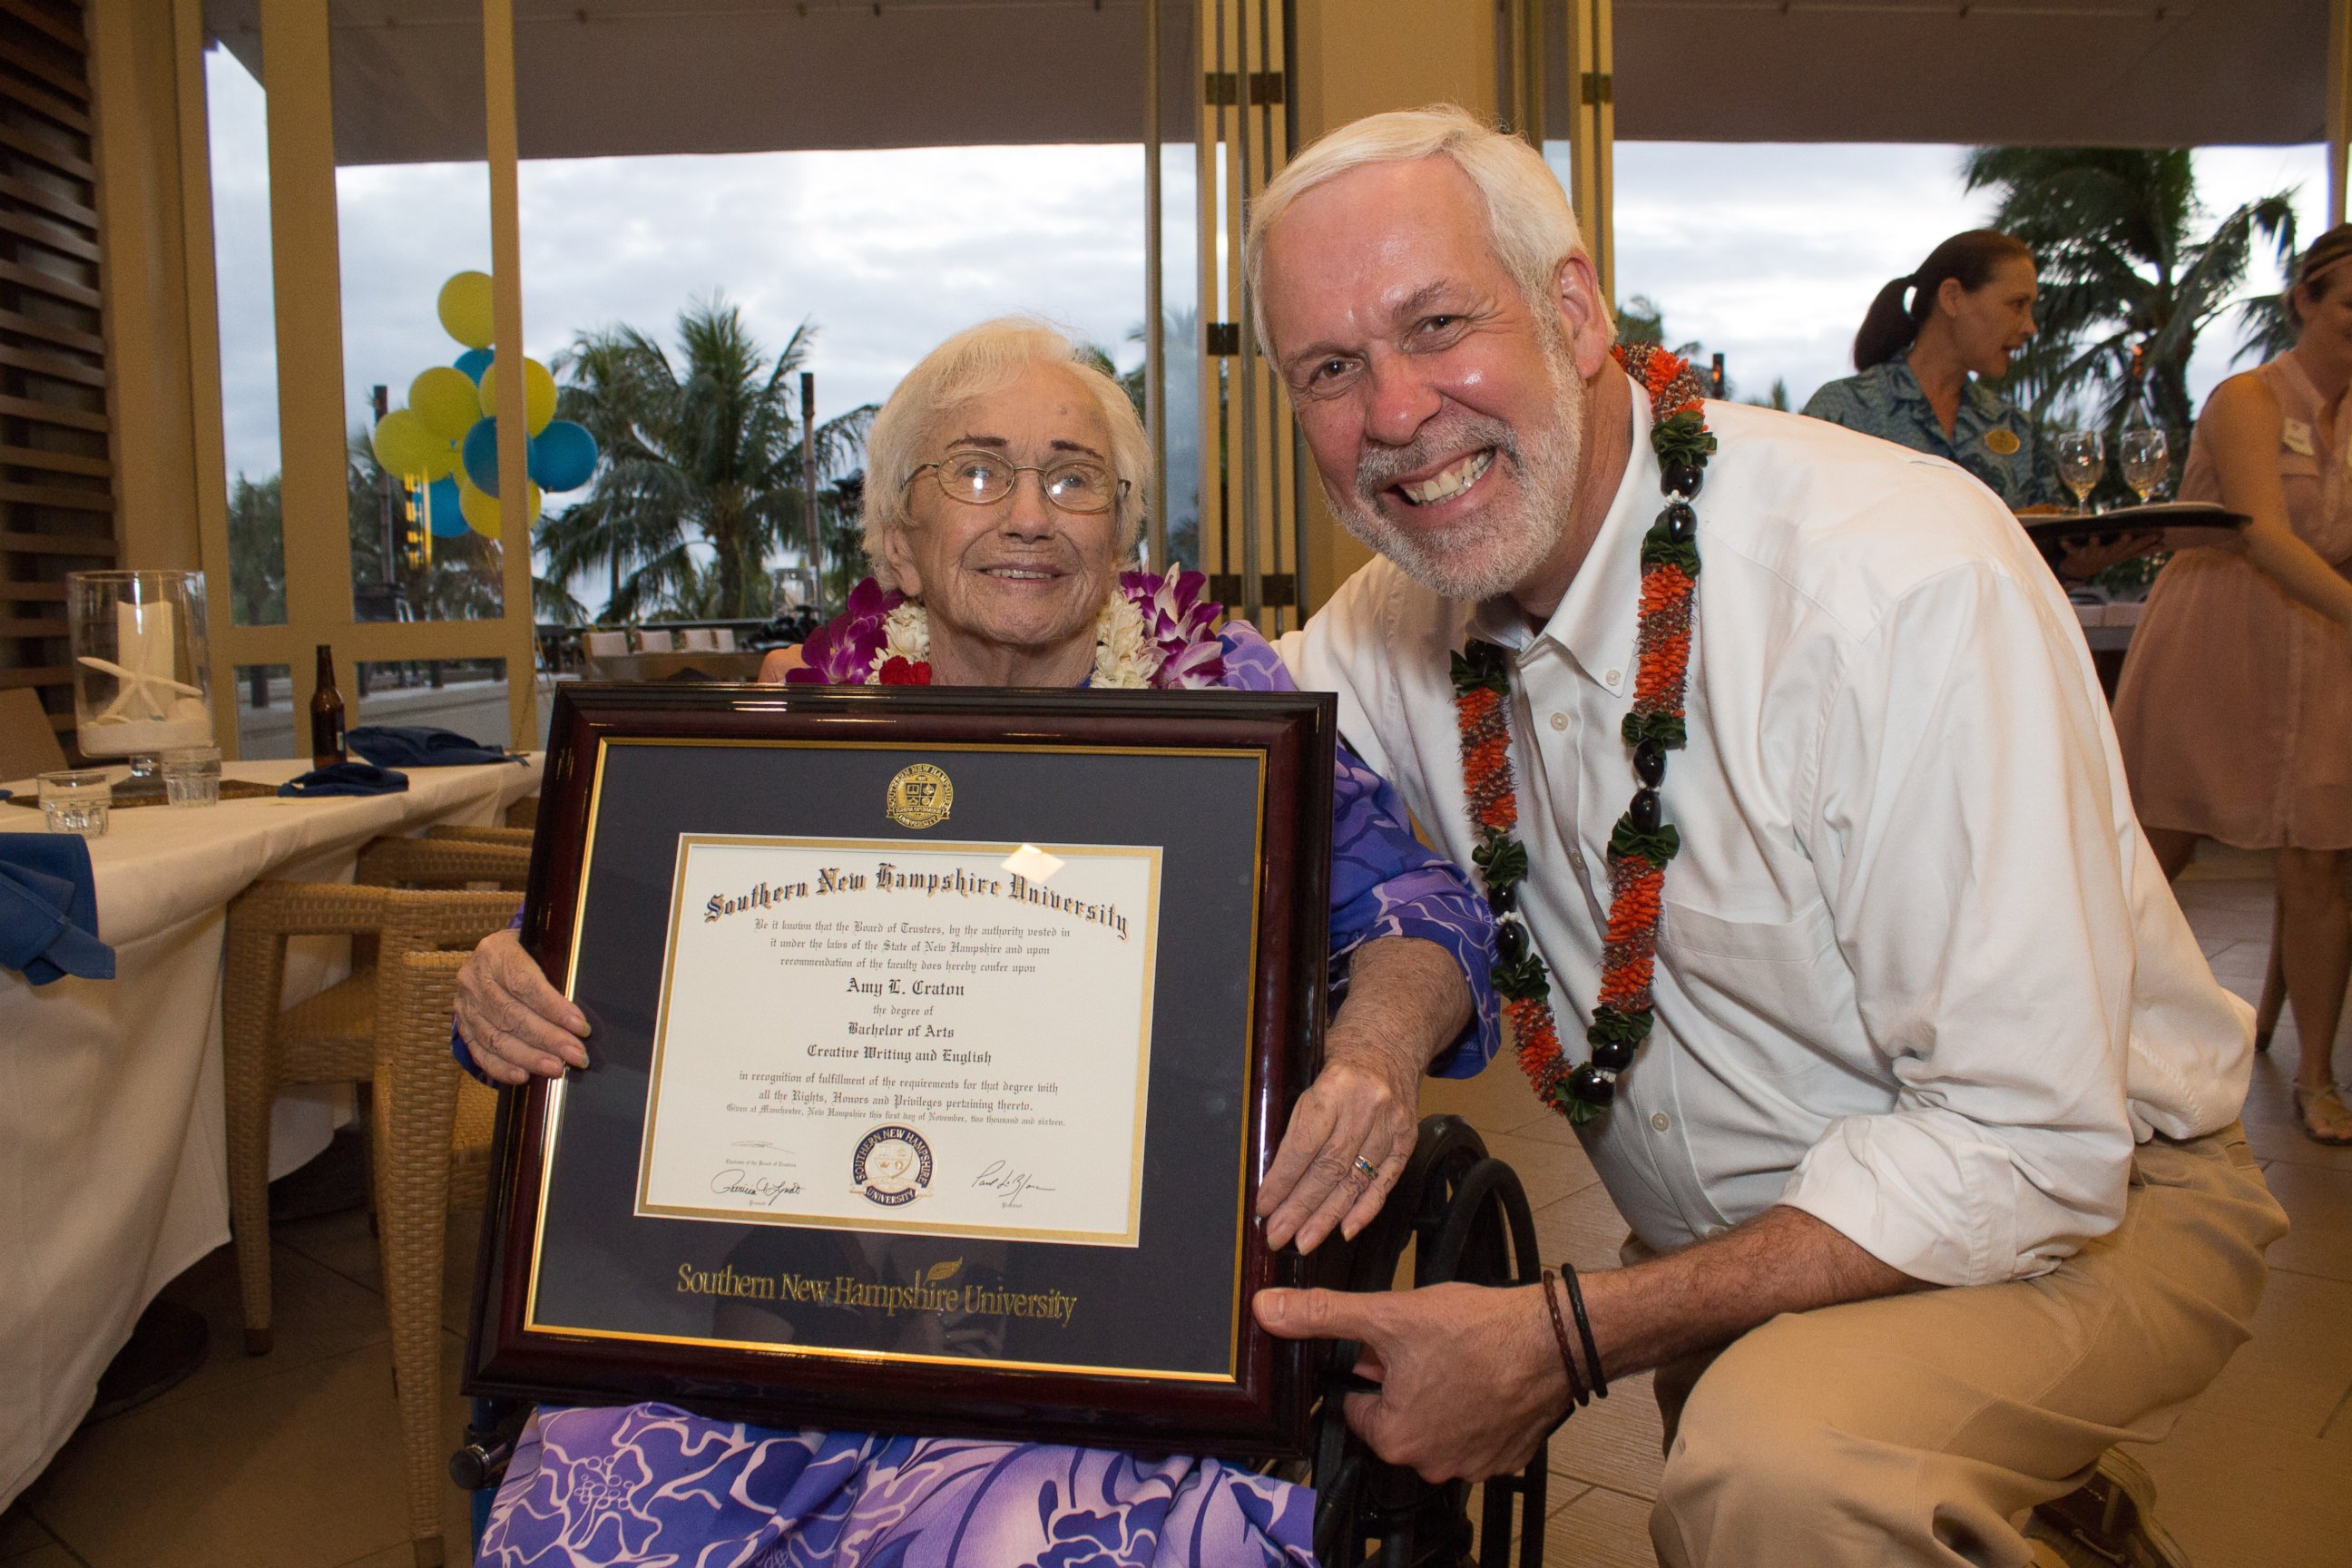 PHOTO: Amy Craton, a 94-year-old graduate of Southern New Hampshire University, with the school's president, Paul LeBlanc.